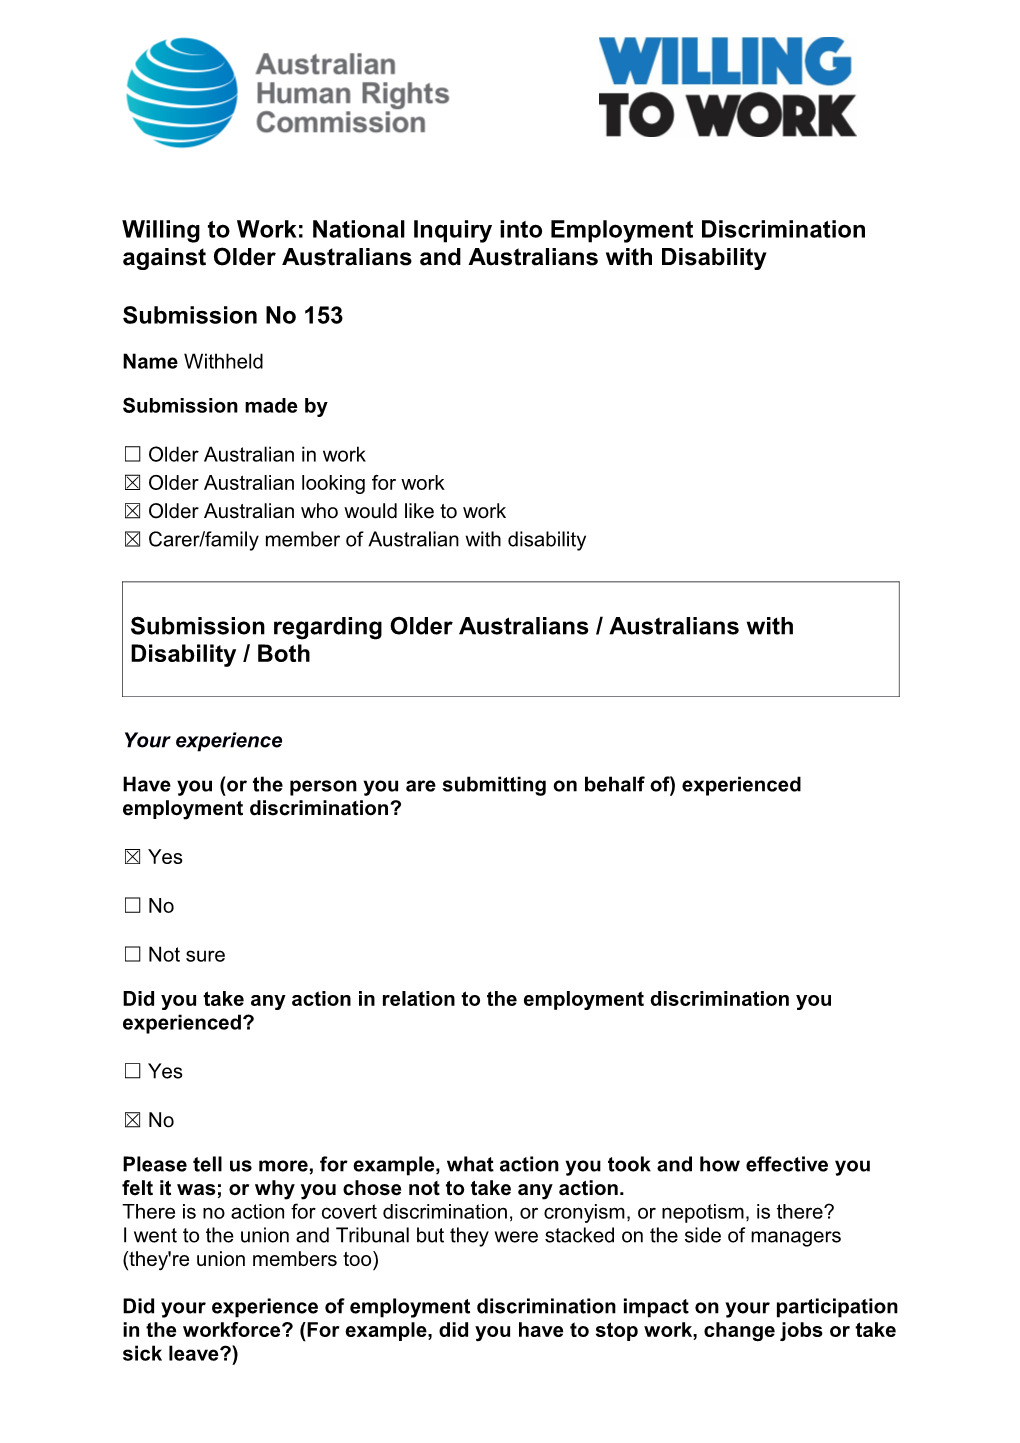 Willing to Work: National Inquiry Into Employment Discrimination Against Older Australians s4